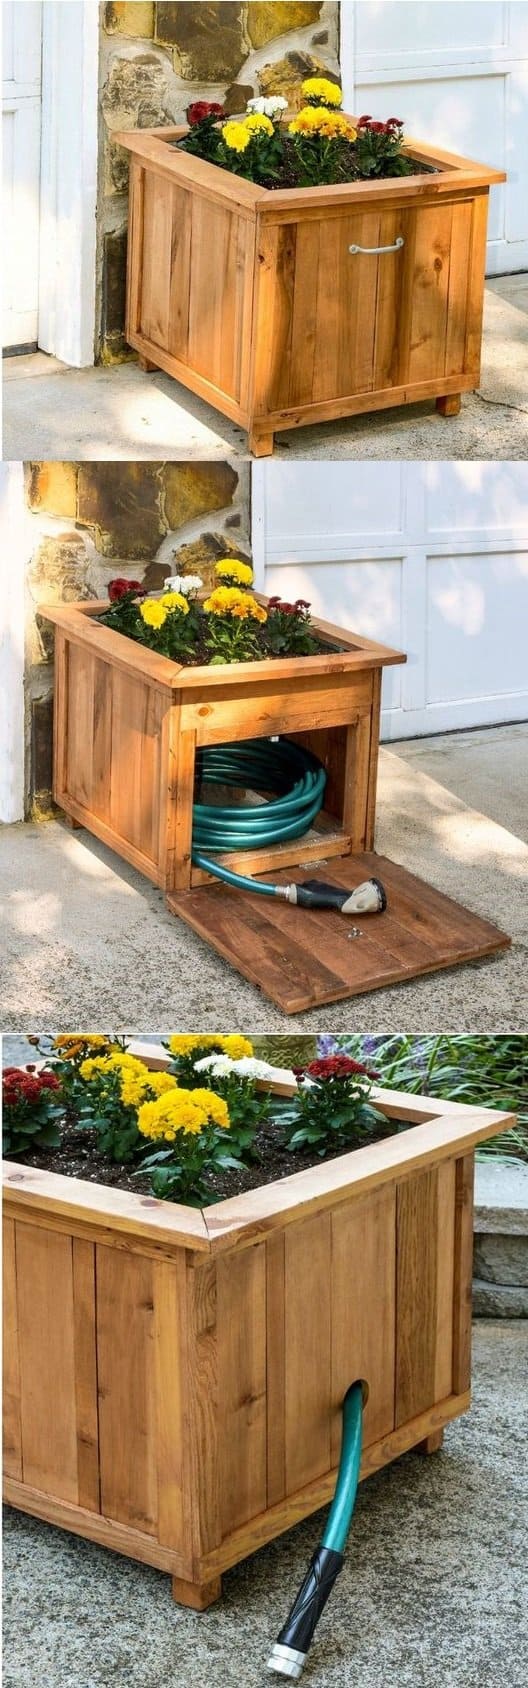 16 Must-Try DIY Projects For Fun Times In The Backyard